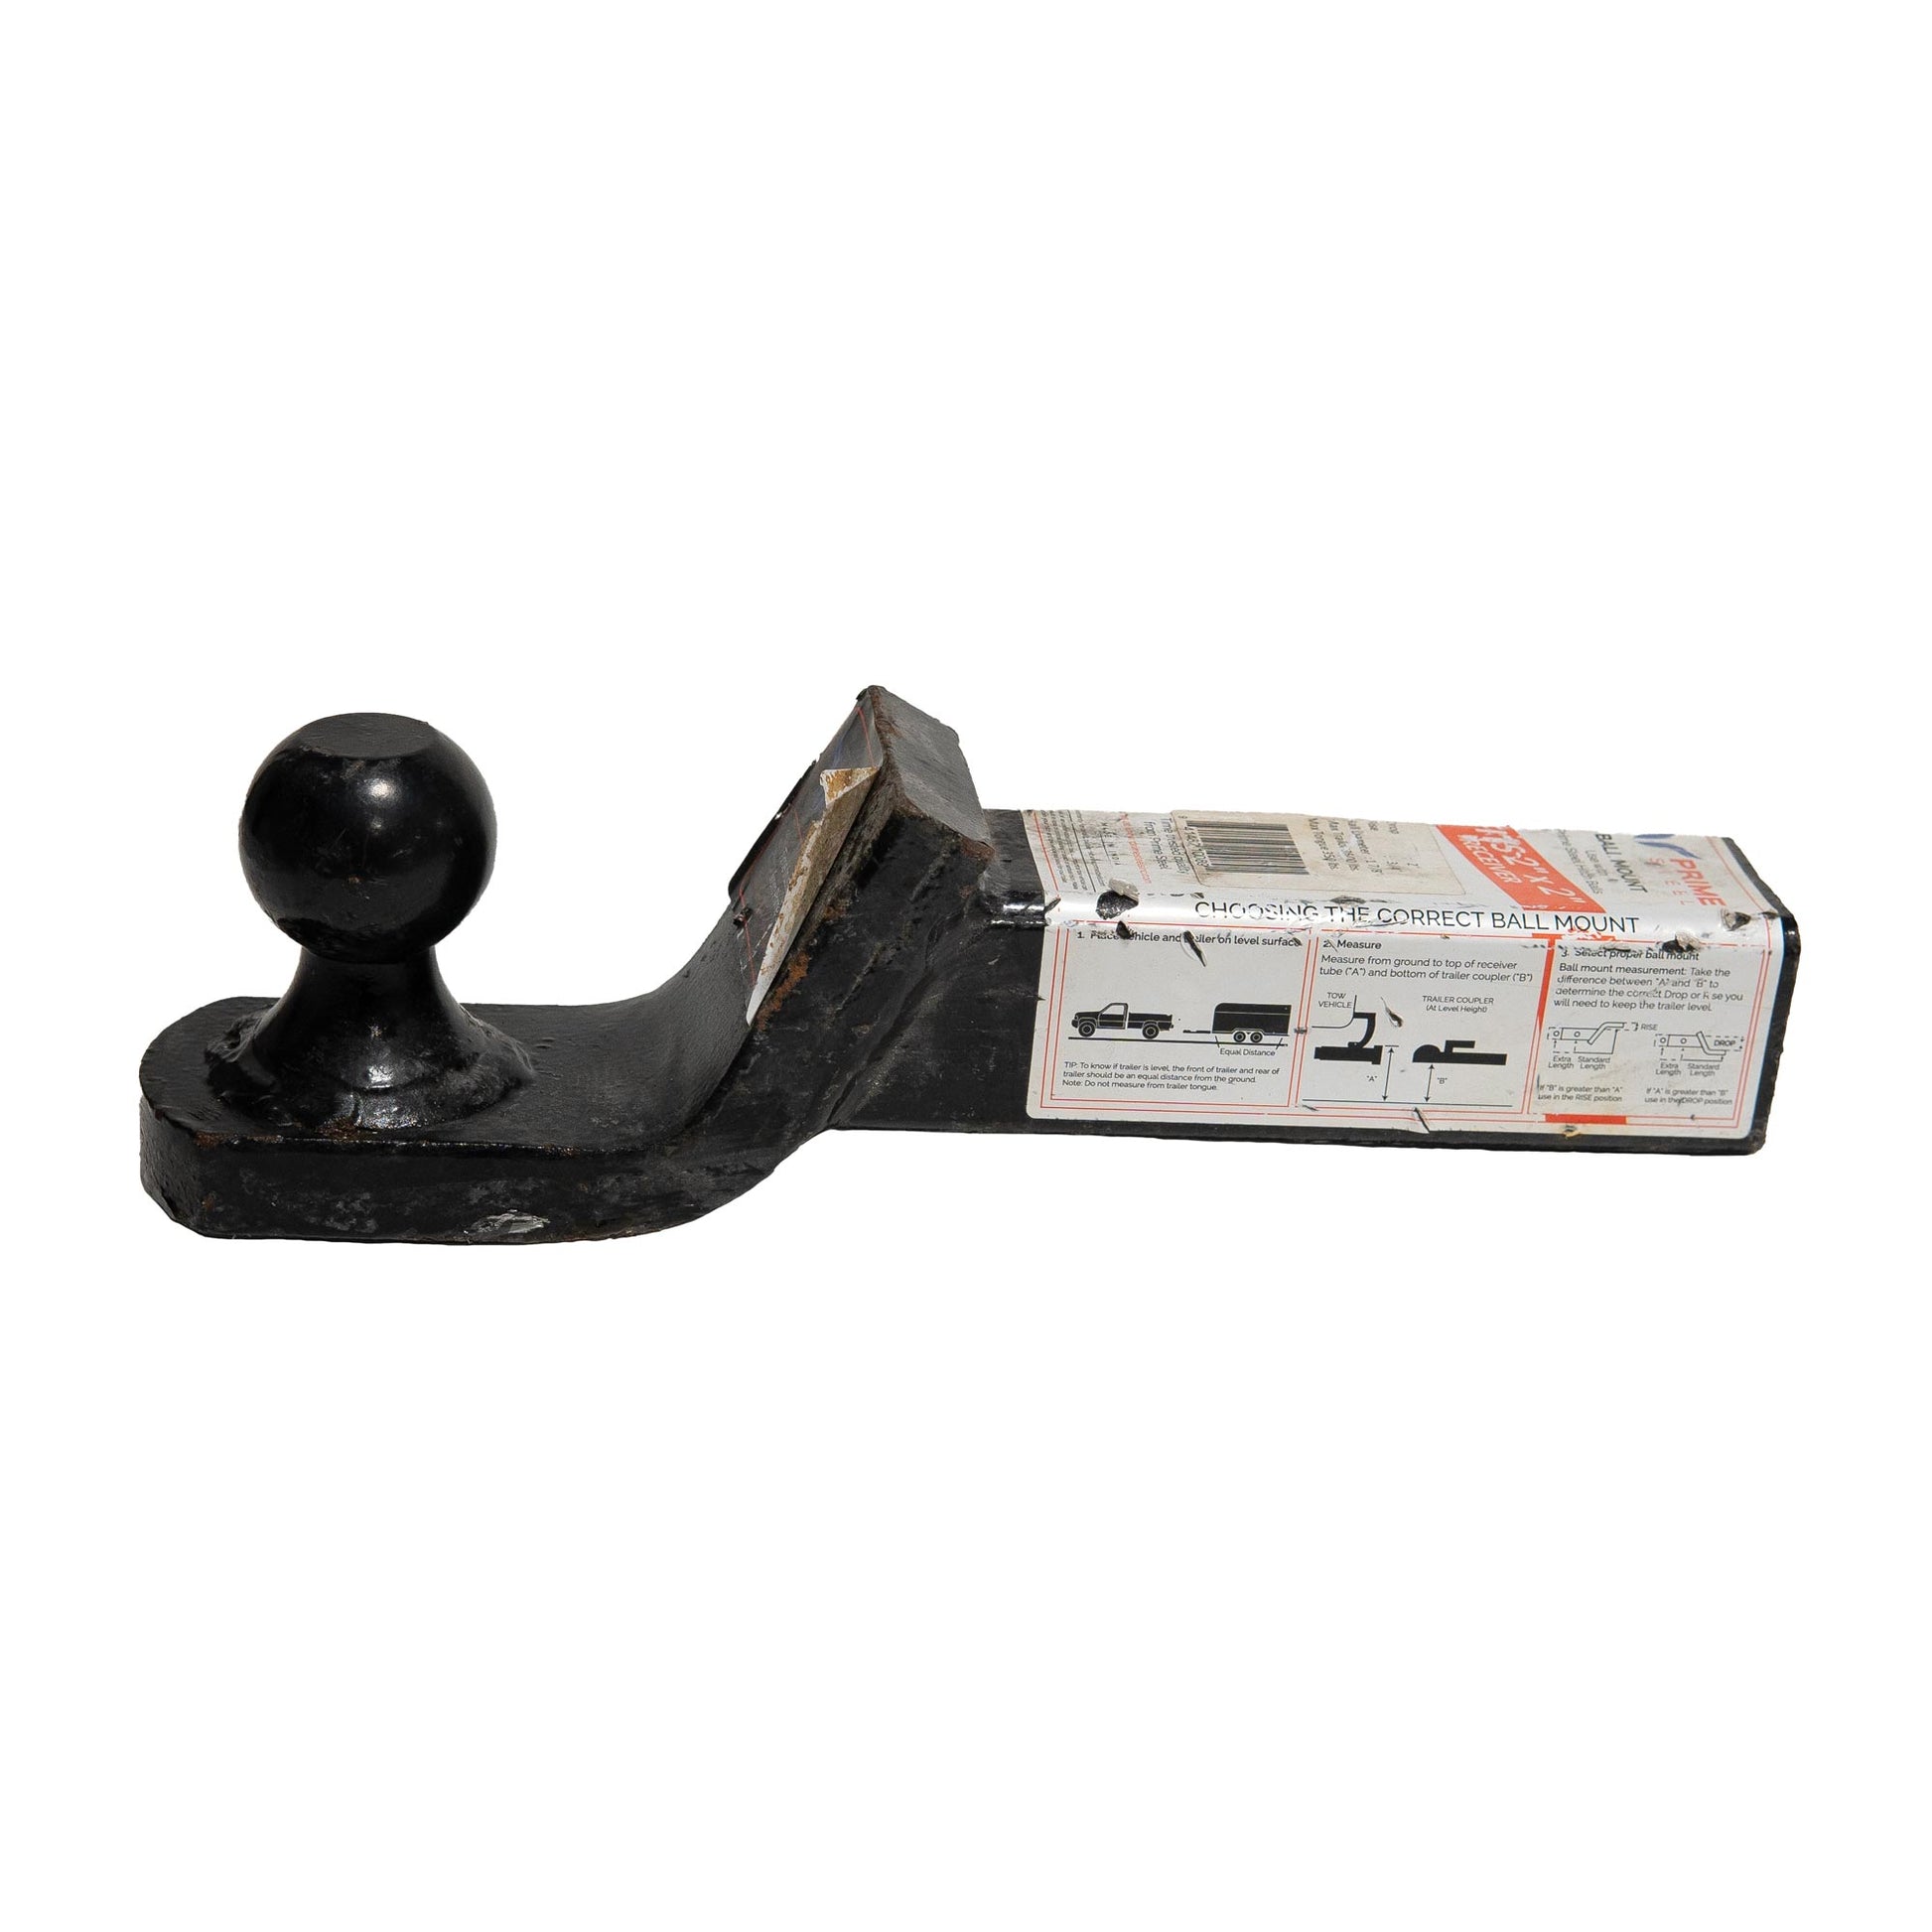 Welded Chrome Trailer Hitch Ball Mount (3.5K Capacity) PS-18089 - The Trailer Parts Outlet